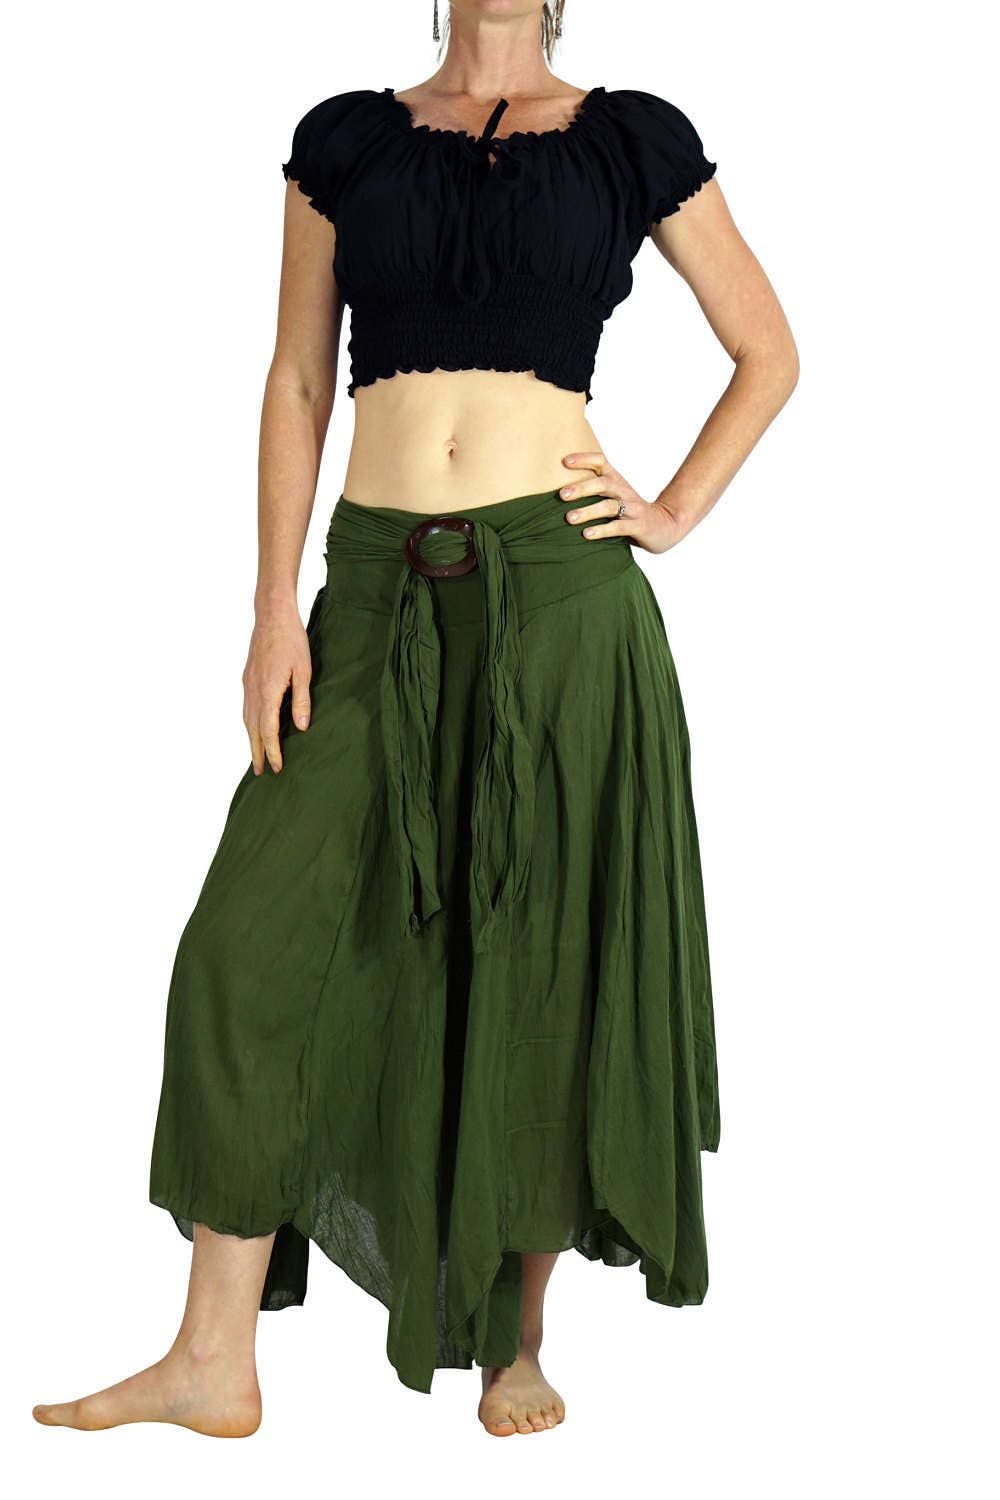 COCONUT SKIRT LONG Forest Green Gypsy Skirt Pirate Costume